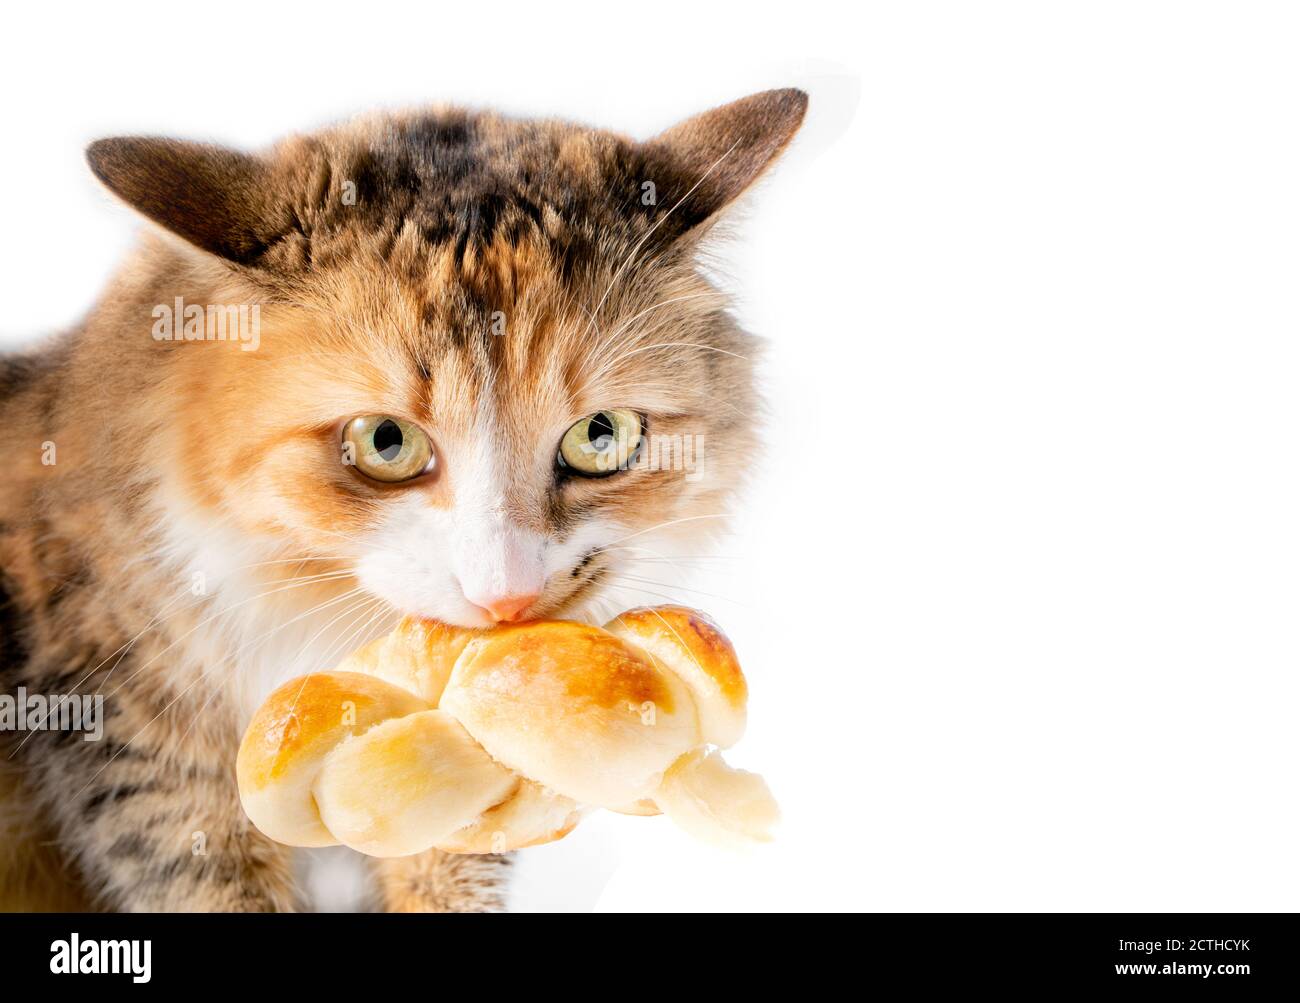 Cat caught stealing food. The mischievous kitty has a big piece of bread (Zopf) in her mouth. Ears back, crazy eyes, growling and unhappy. Stock Photo